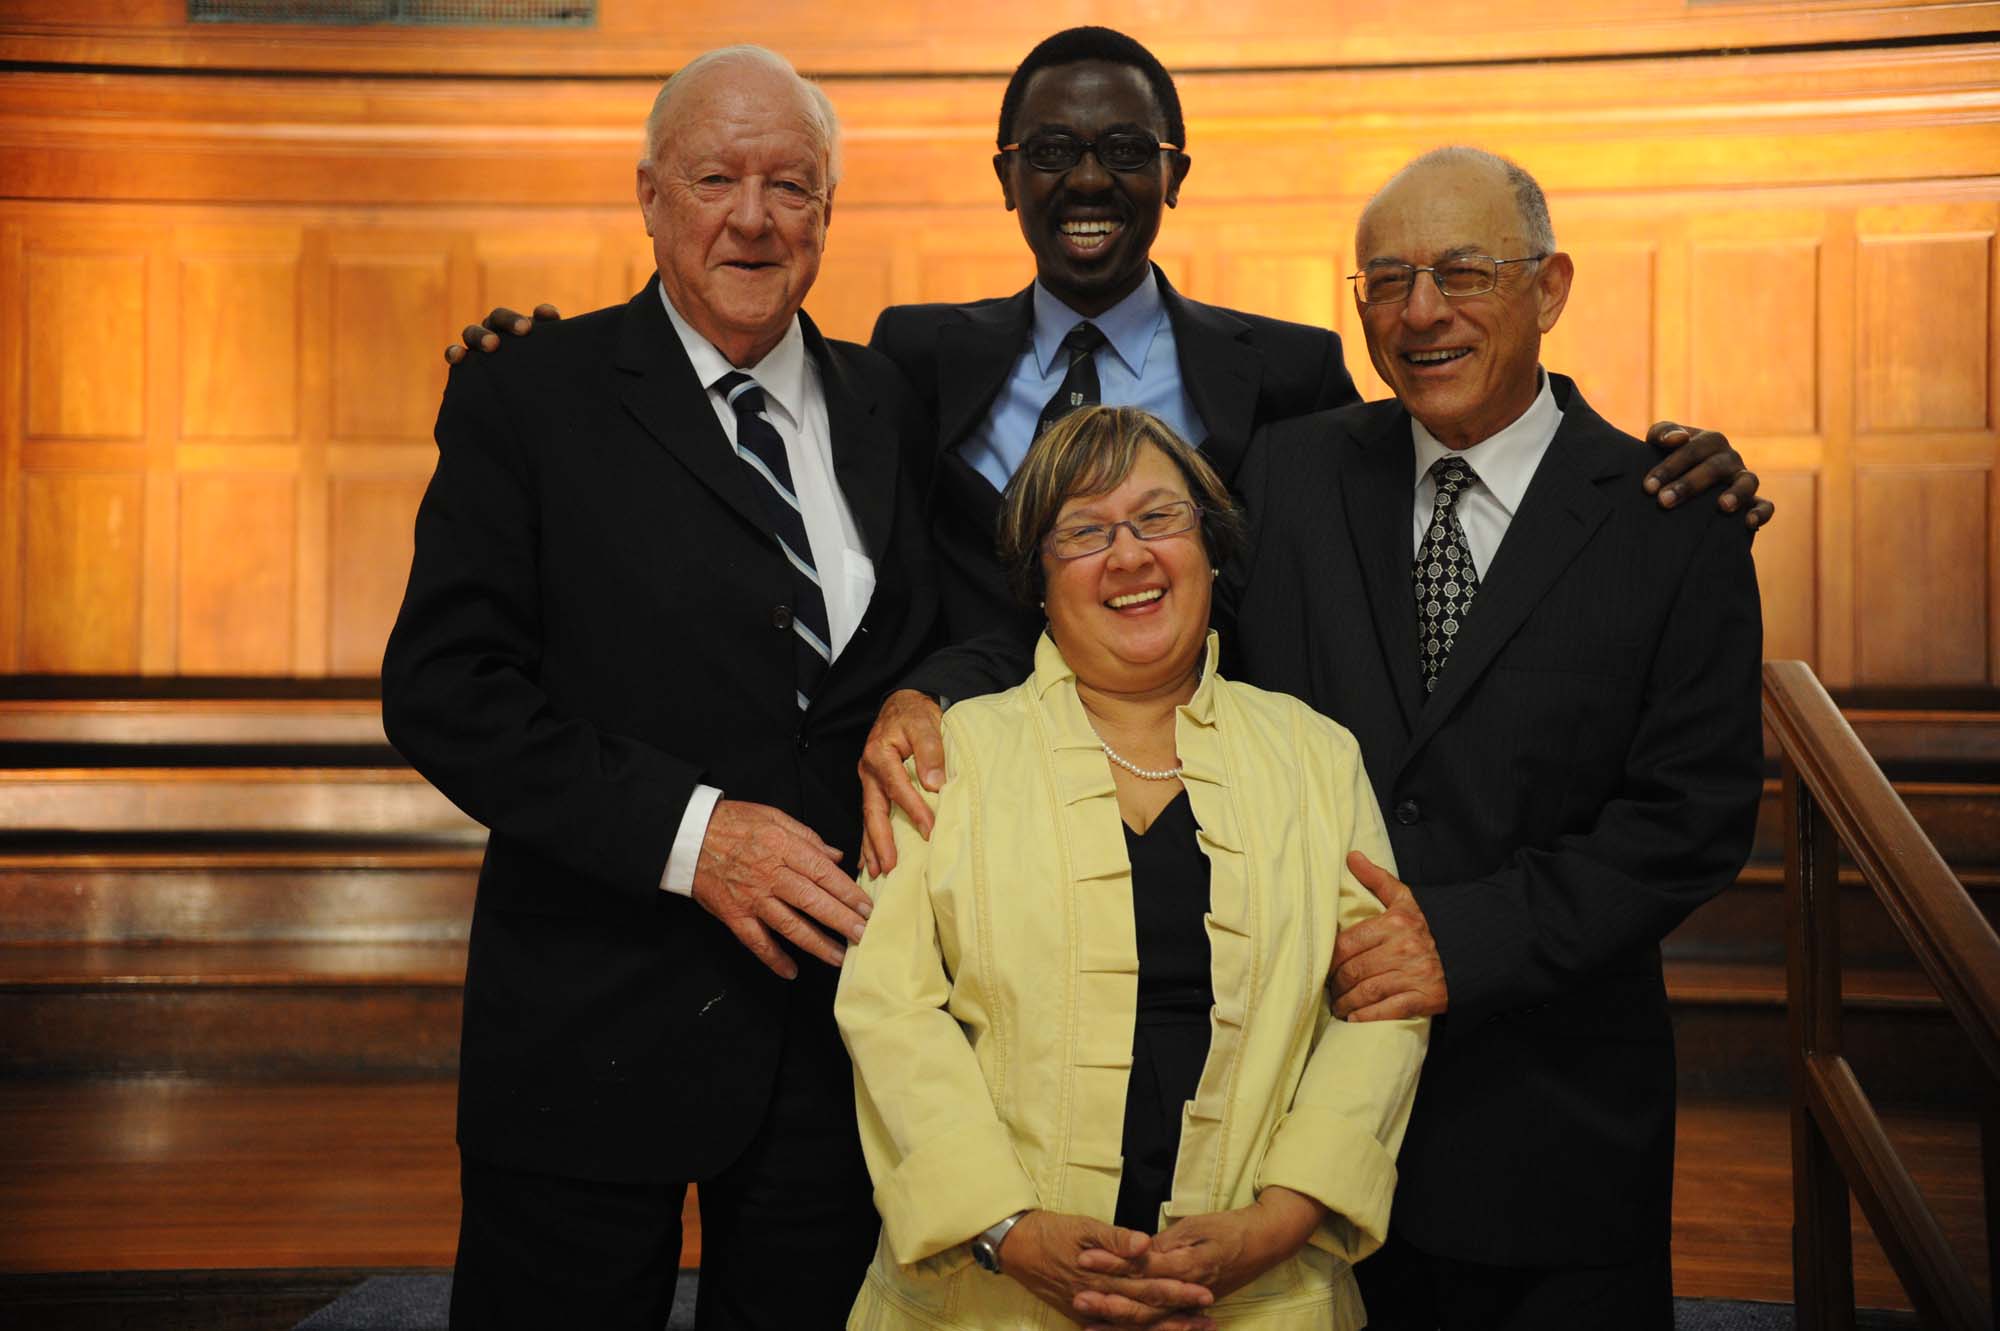 With the late Prof Bongani Mayosi (head of the Department of Medicine), Prof Solomon Benatar (former head of the Department of Medicine) and Prof Marian Jacobs (dean of the Faculty of Health Sciences) celebrating the 90th anniversary of UCT’s Department of Medicine in February 2010.